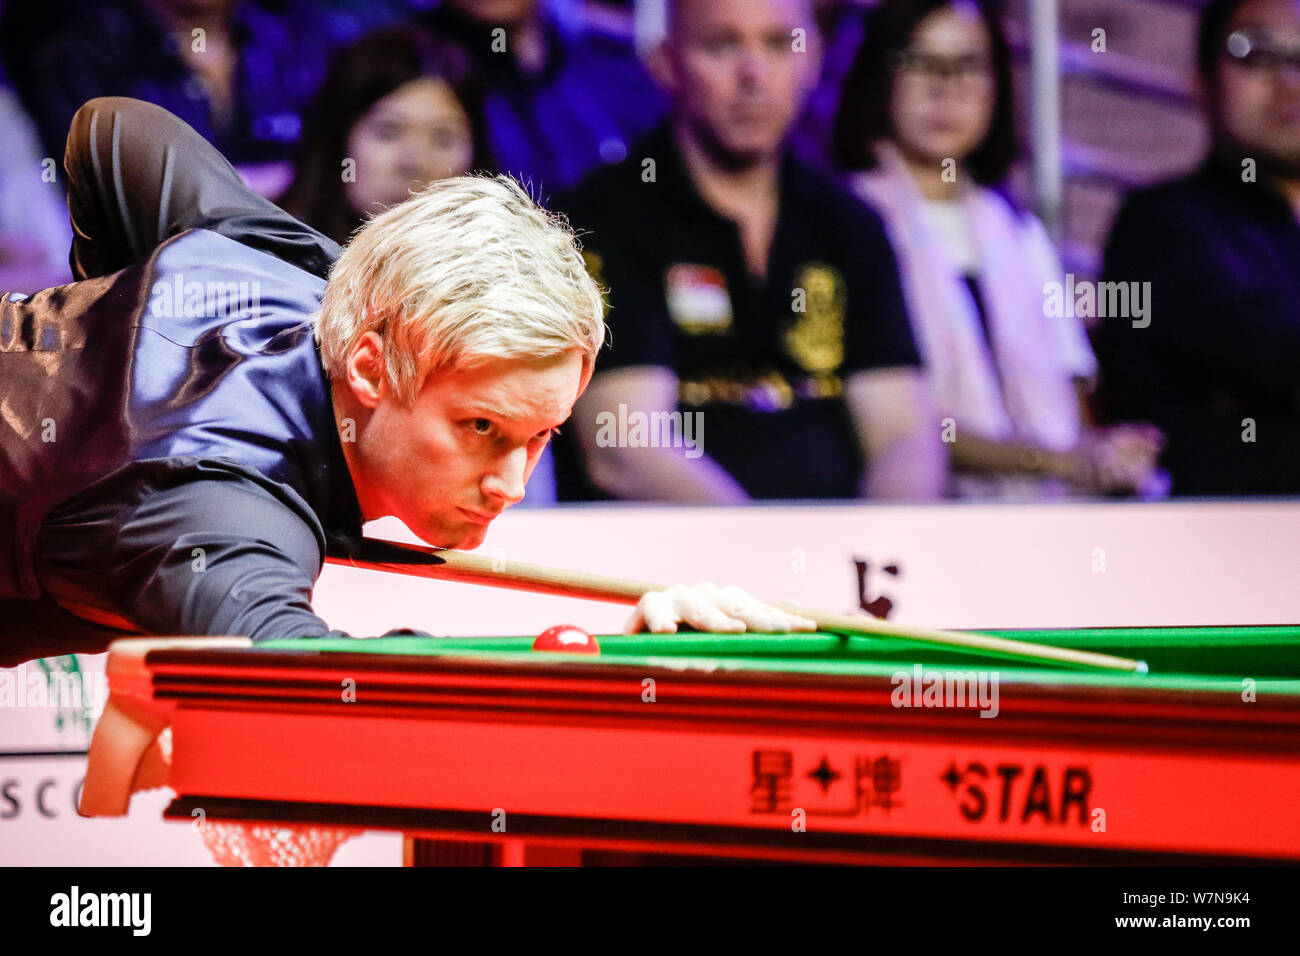 Neil Robertson of Australia plays a shot to Ronnie OSullivan of England in the final match during the World Snooker Hong Kong Masters 2017 in Hong Ko Stock Photo